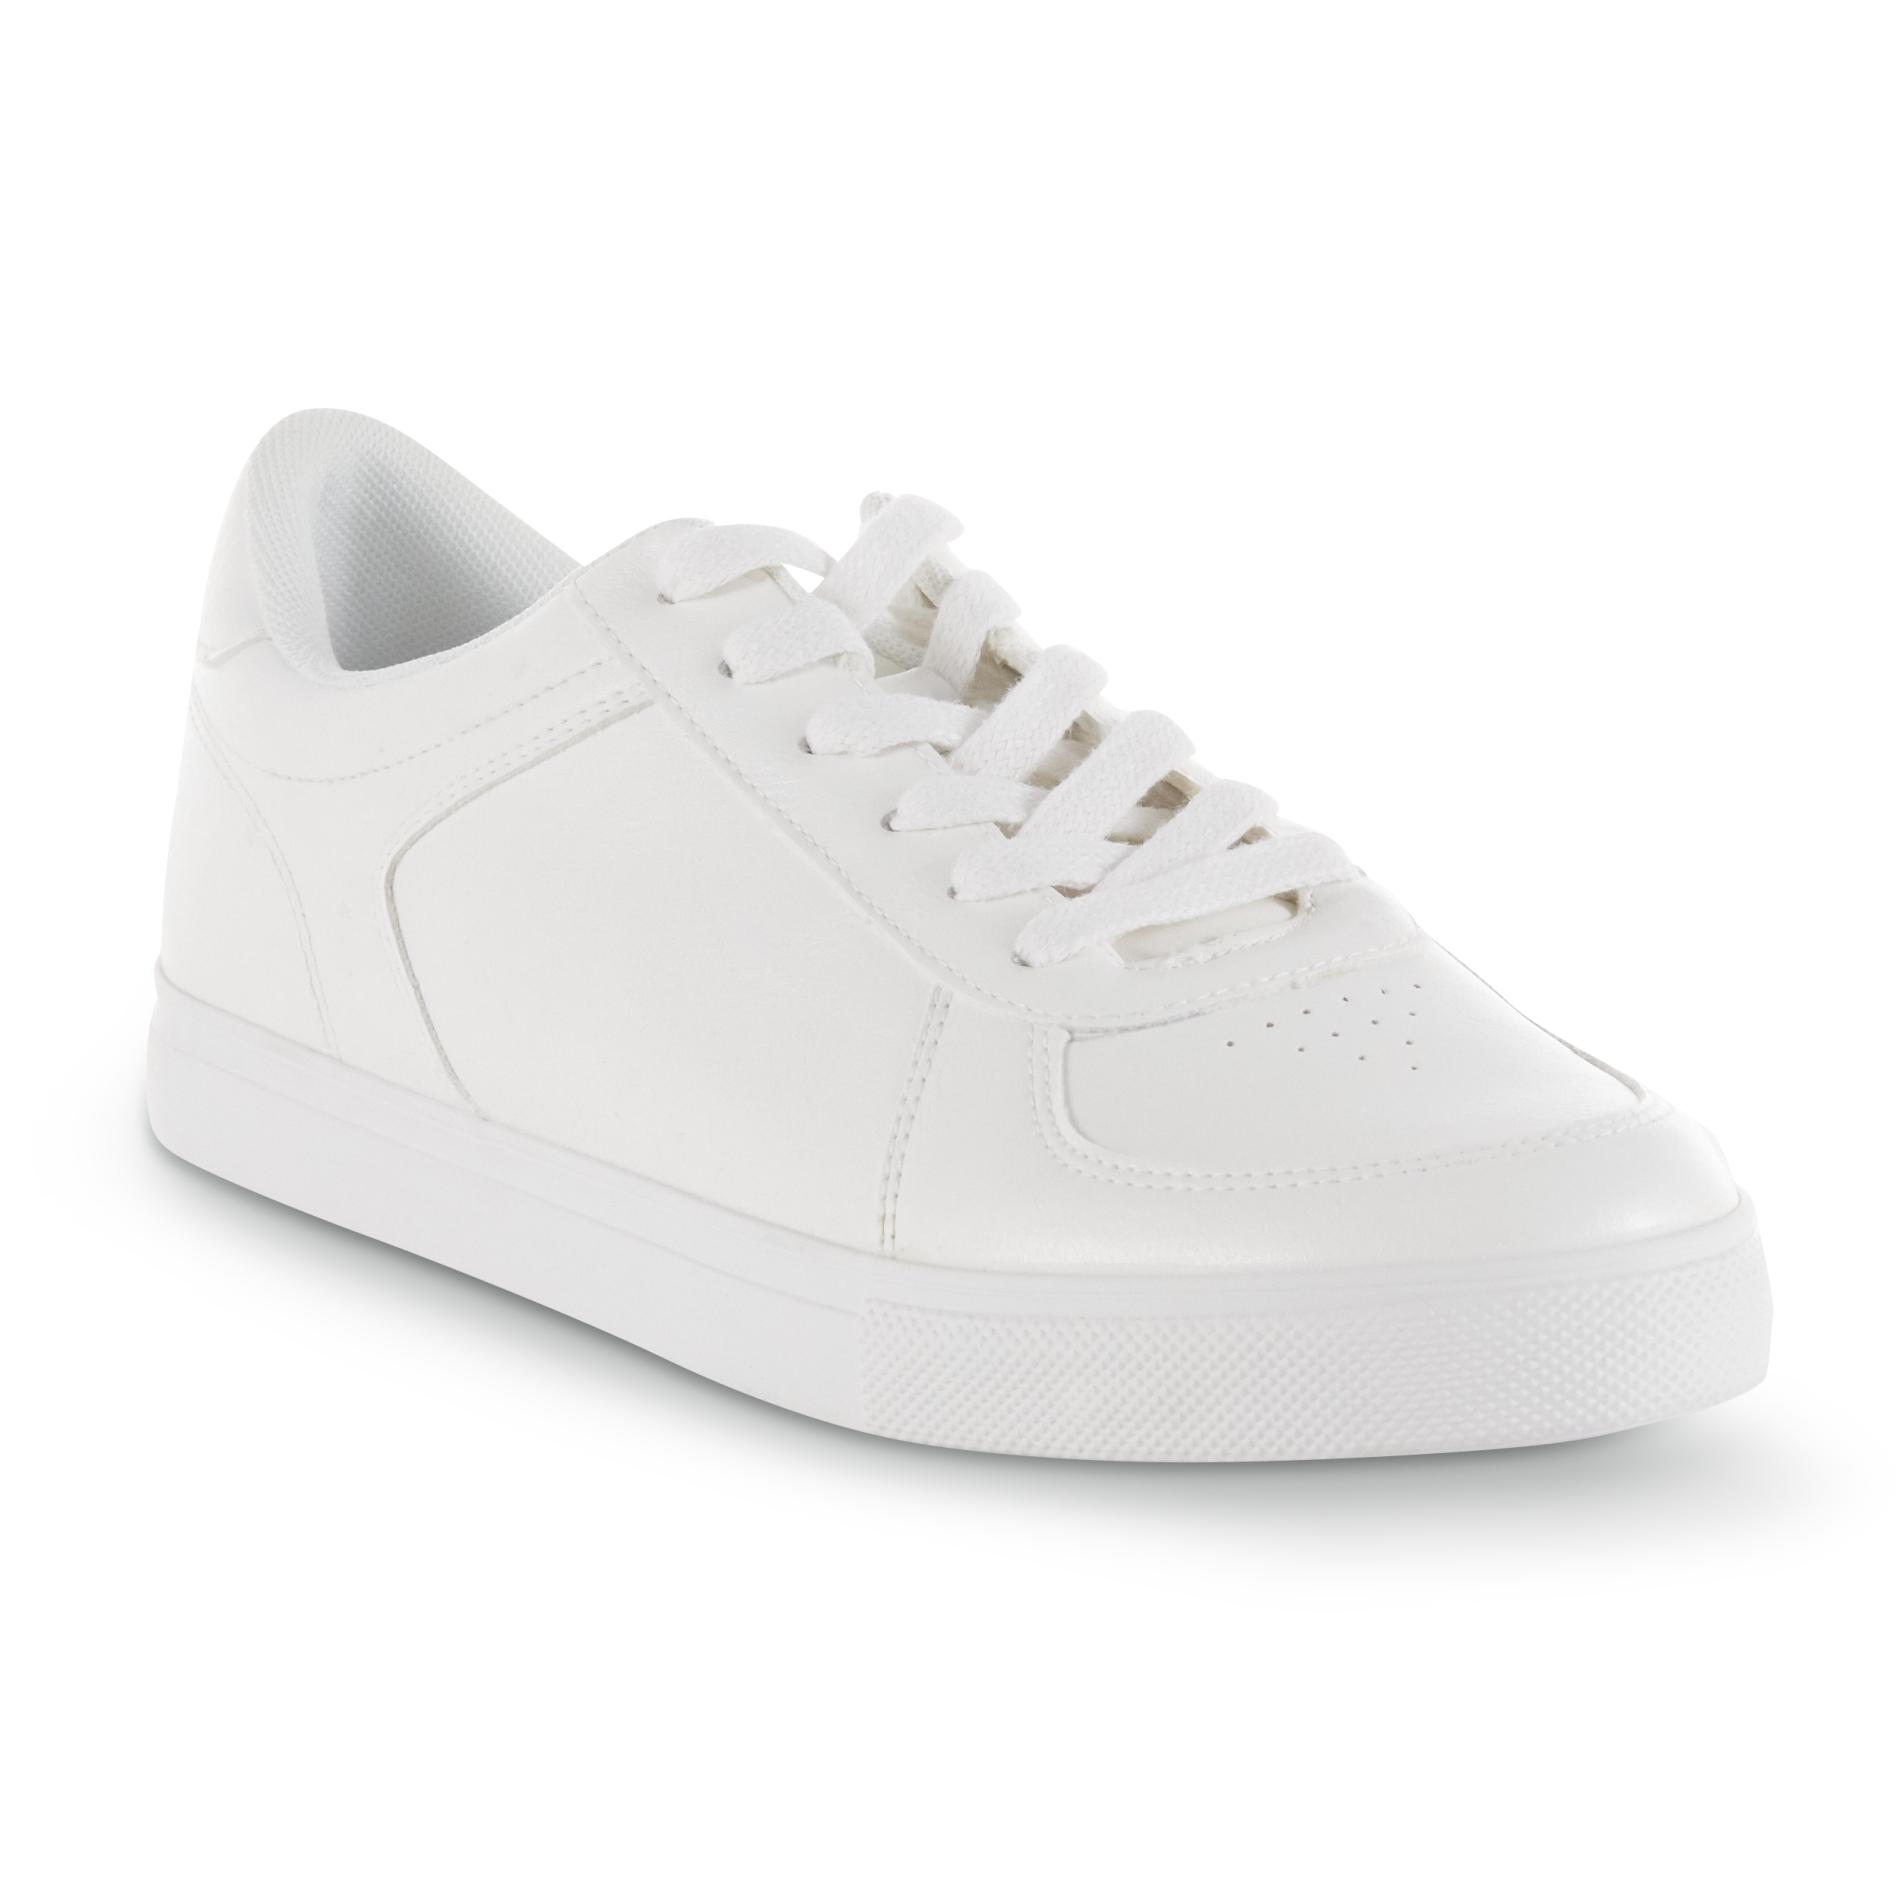 Simply Styled Men's Justin Casual Oxford Shoe - White